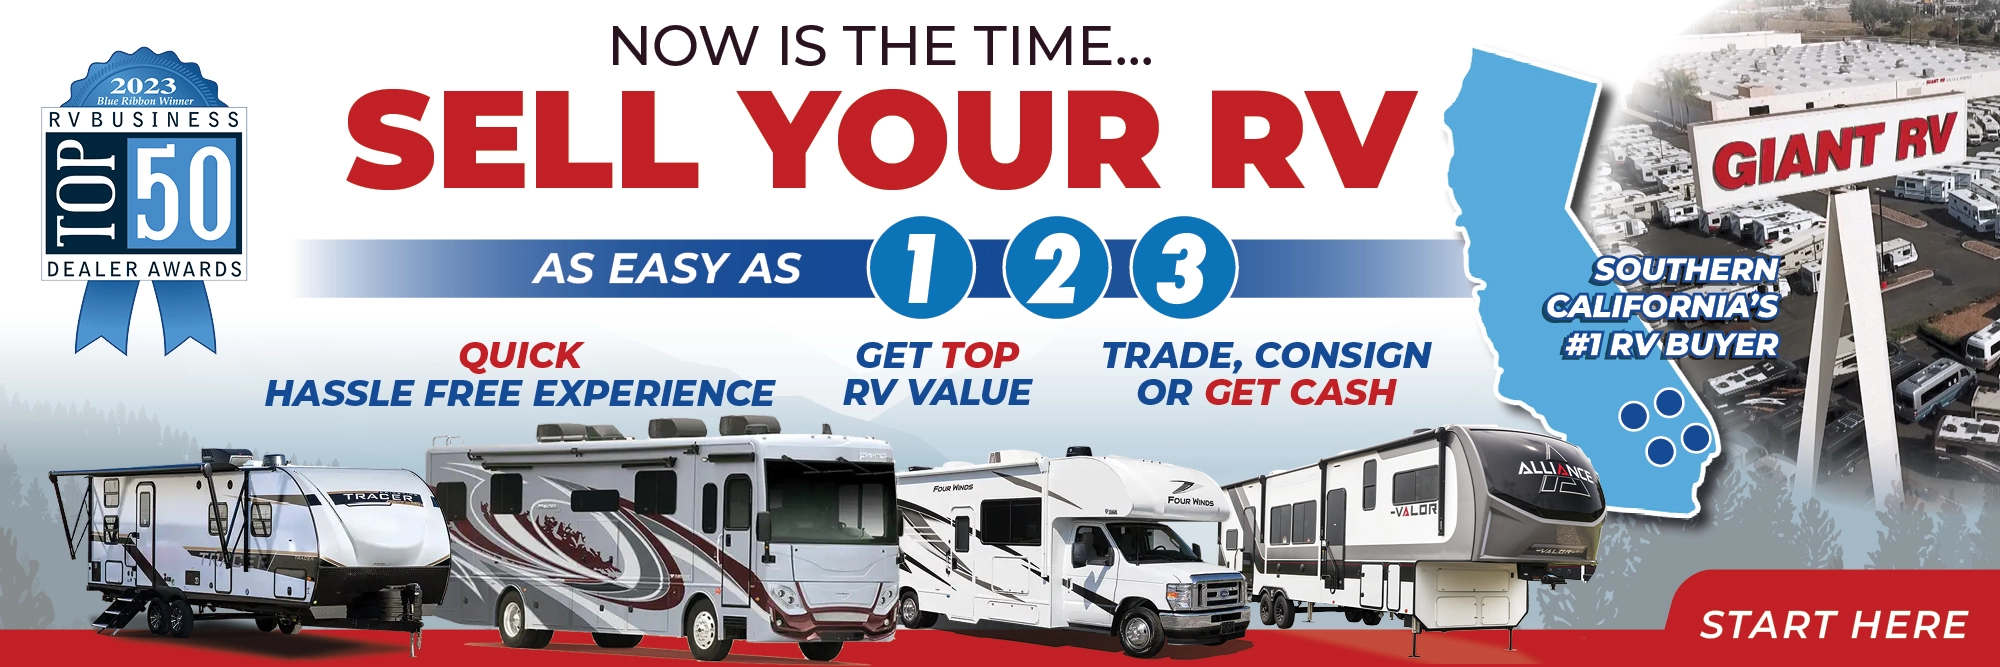 Sell us your RV